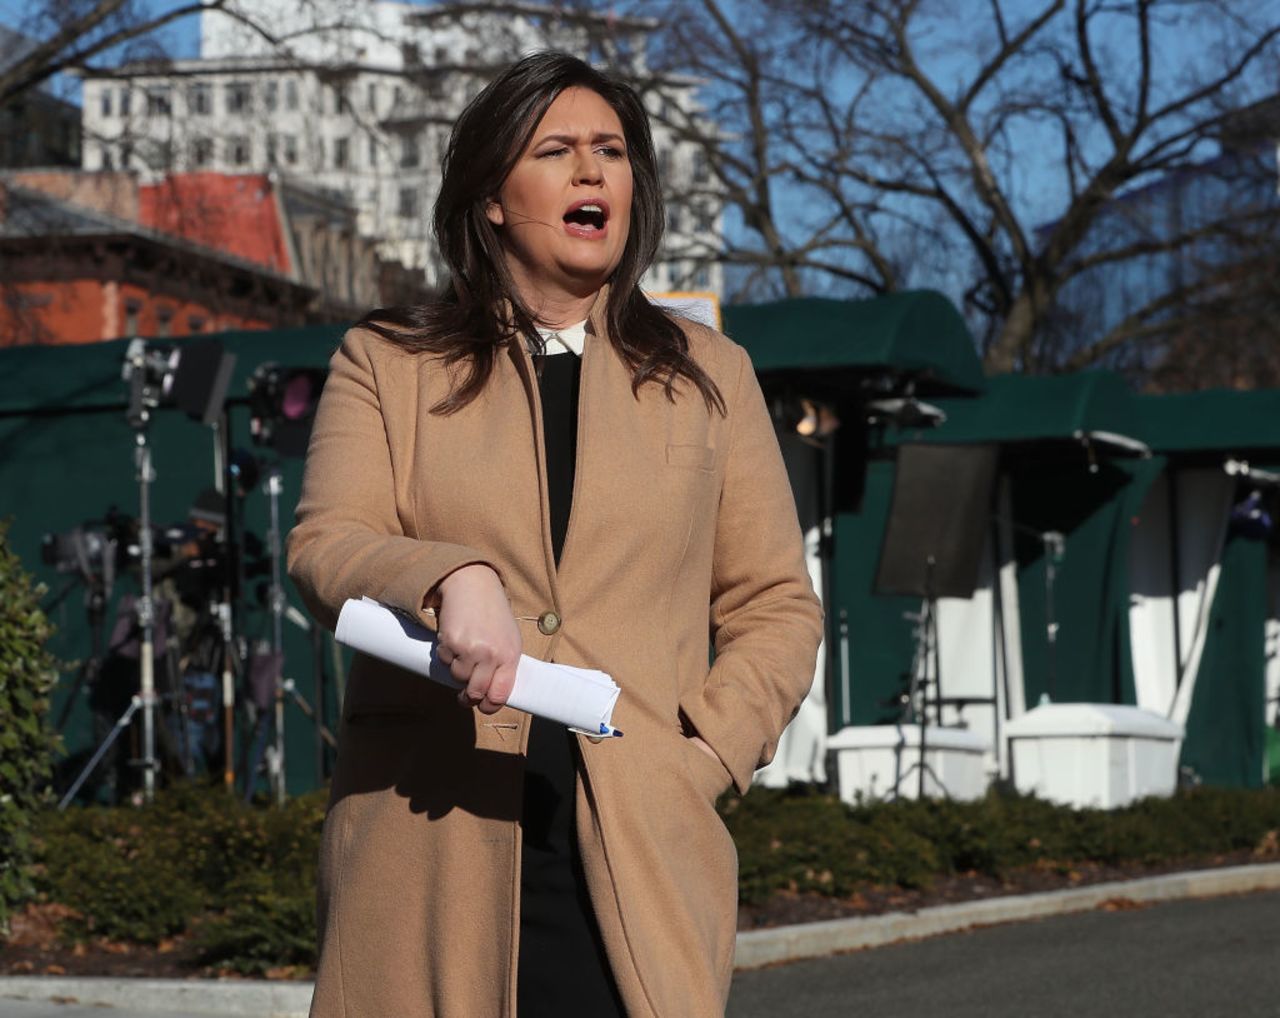 White House Press Secretary Sarah Huckabee Sanders speaks to the media in the White House driveway after appearing on a morning television show on Dec. 18, 2018 in Washington, DC.